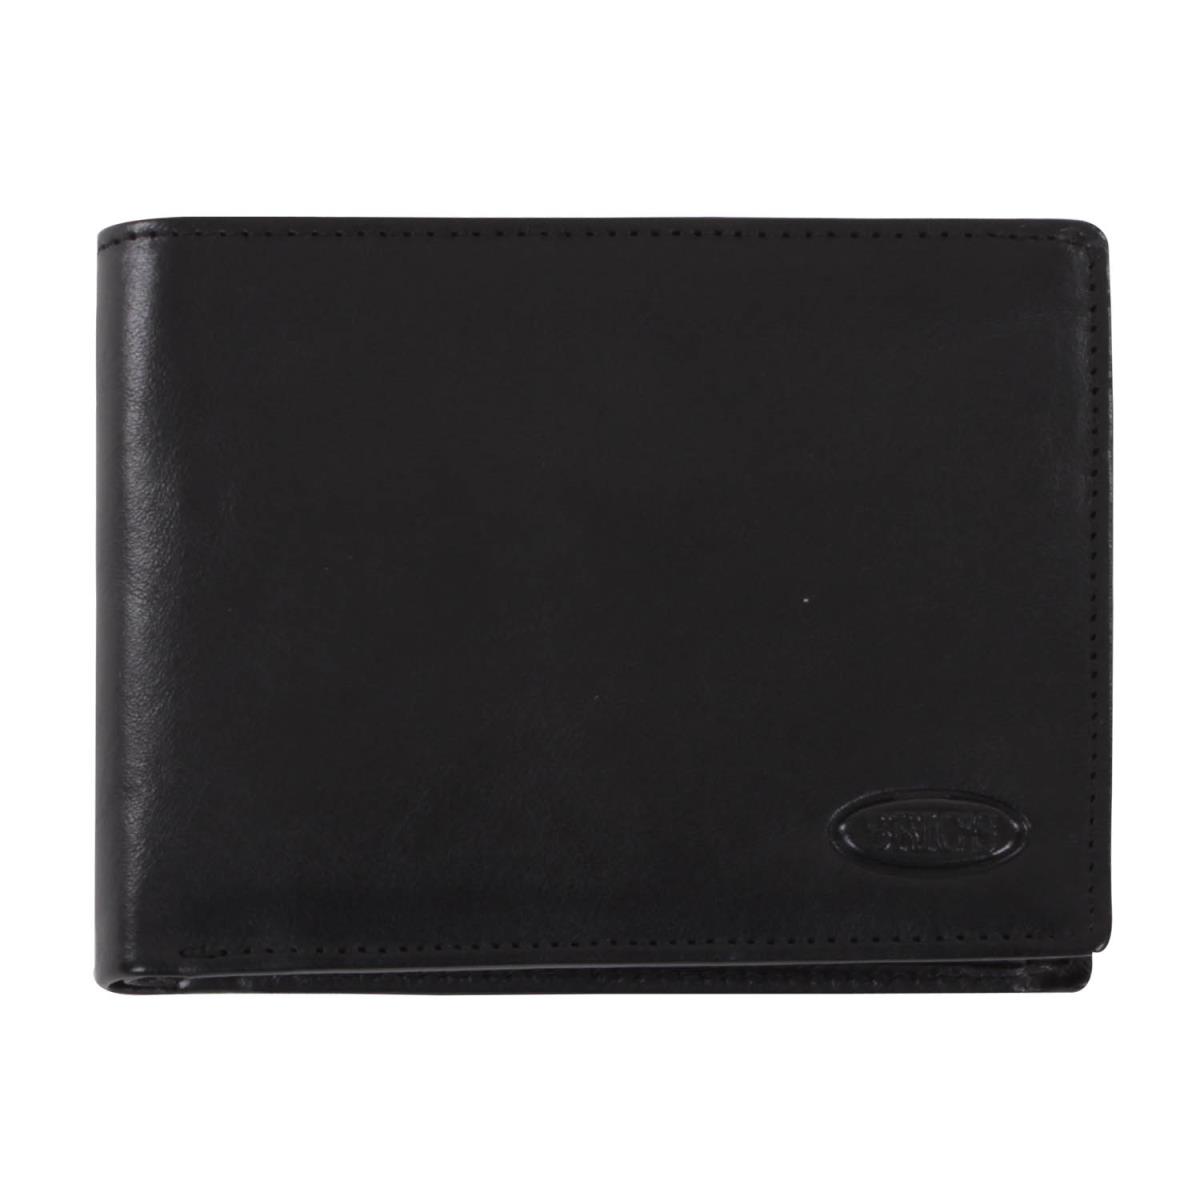 Bric`s Bric`s Men`s Monte Rosa Vegetable-tanned Leather Wallet with Transparent Flap Black